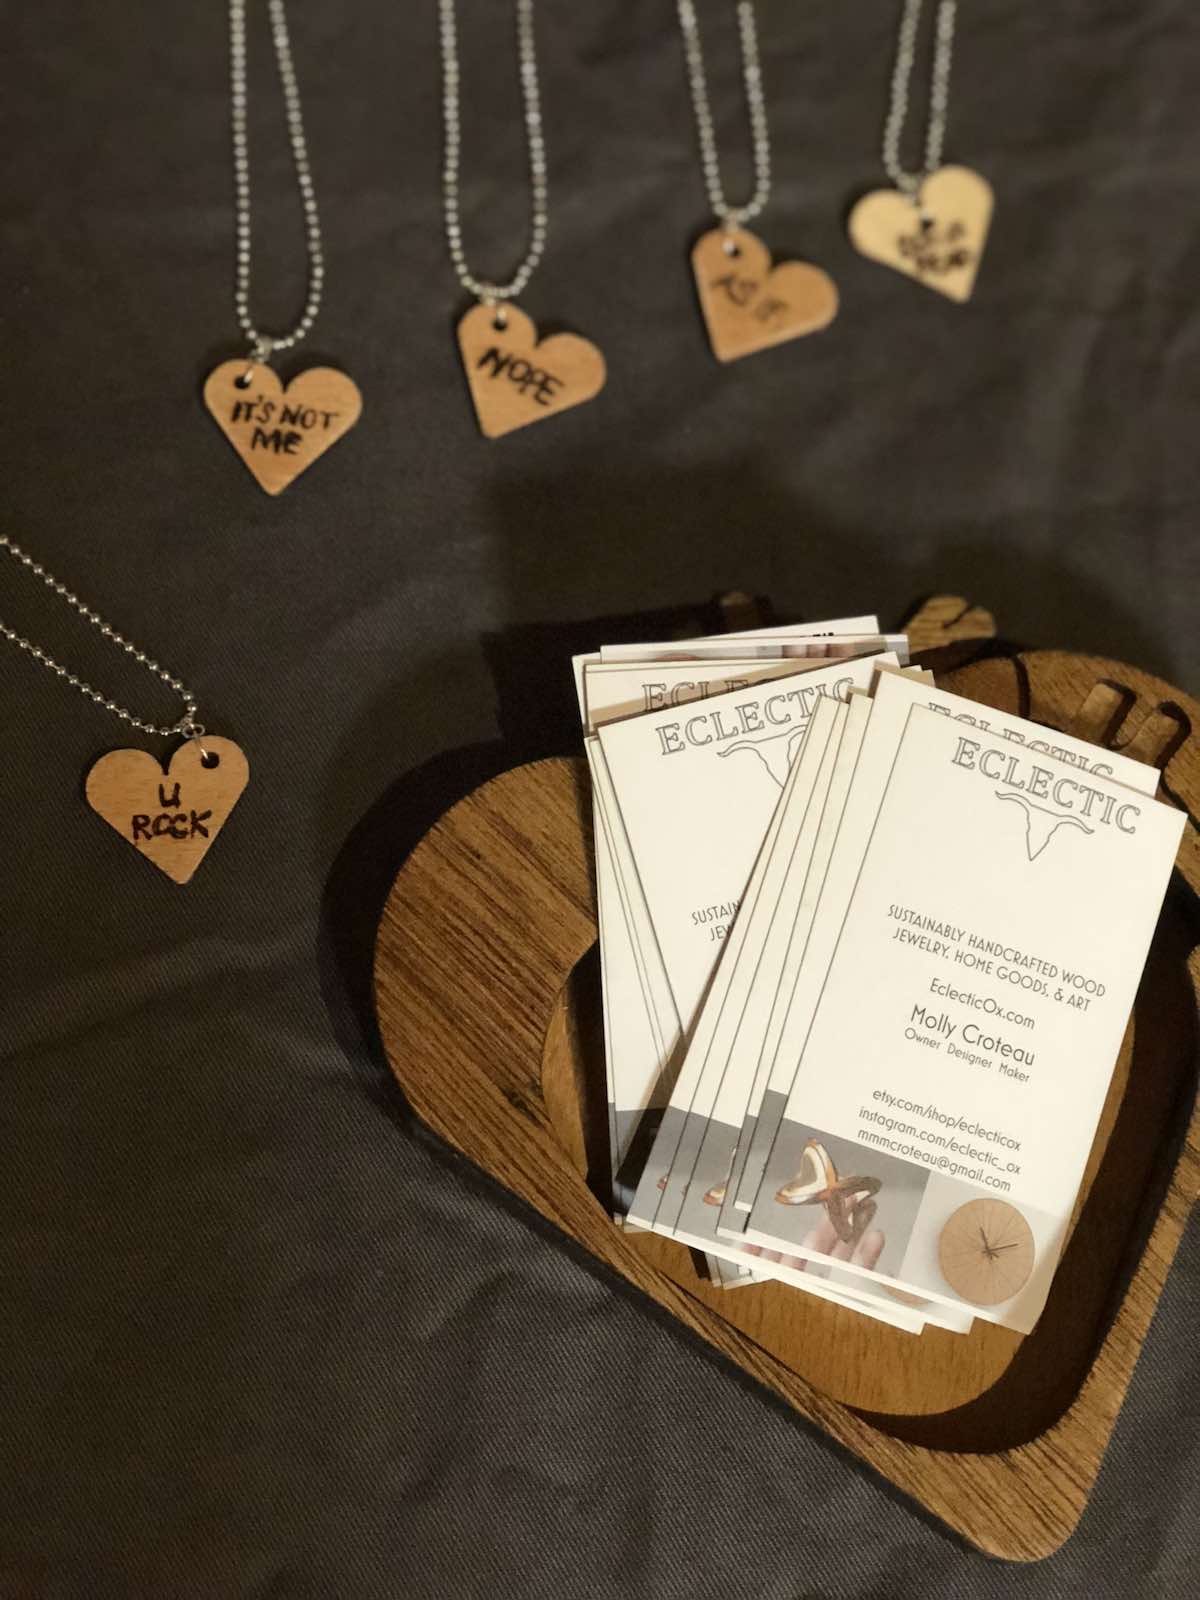 Hearts and Cards: Eclectic Ox handmade, sustainable wares, based in Costa Mesa, California. (photo: Samantha Chagollan)